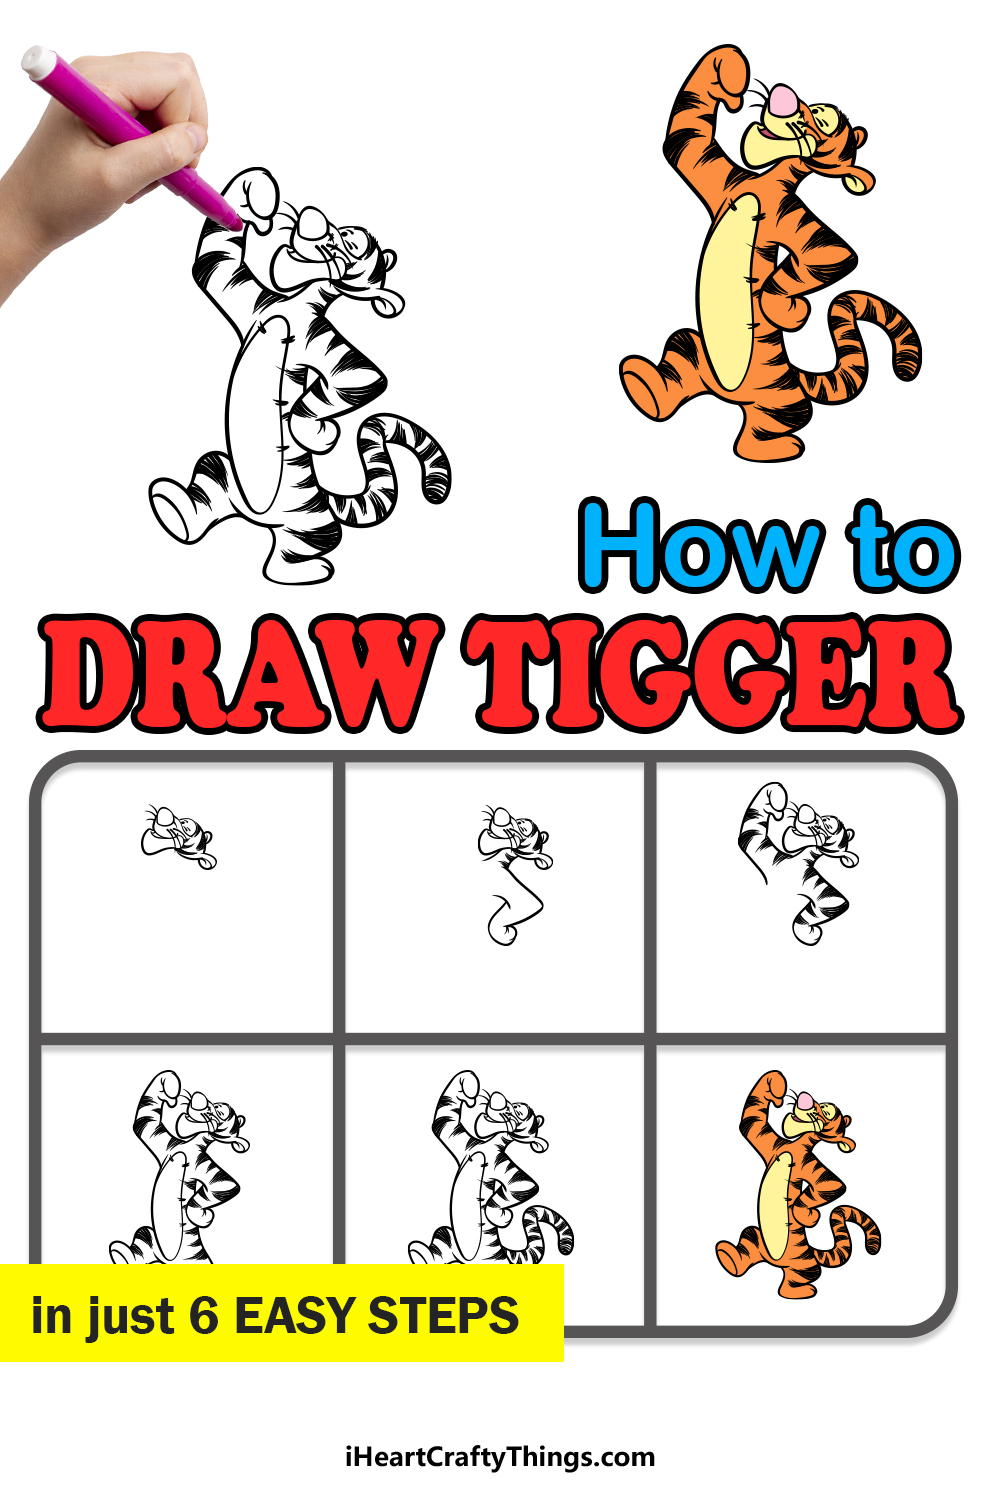 how to draw Tigger in 6 easy steps